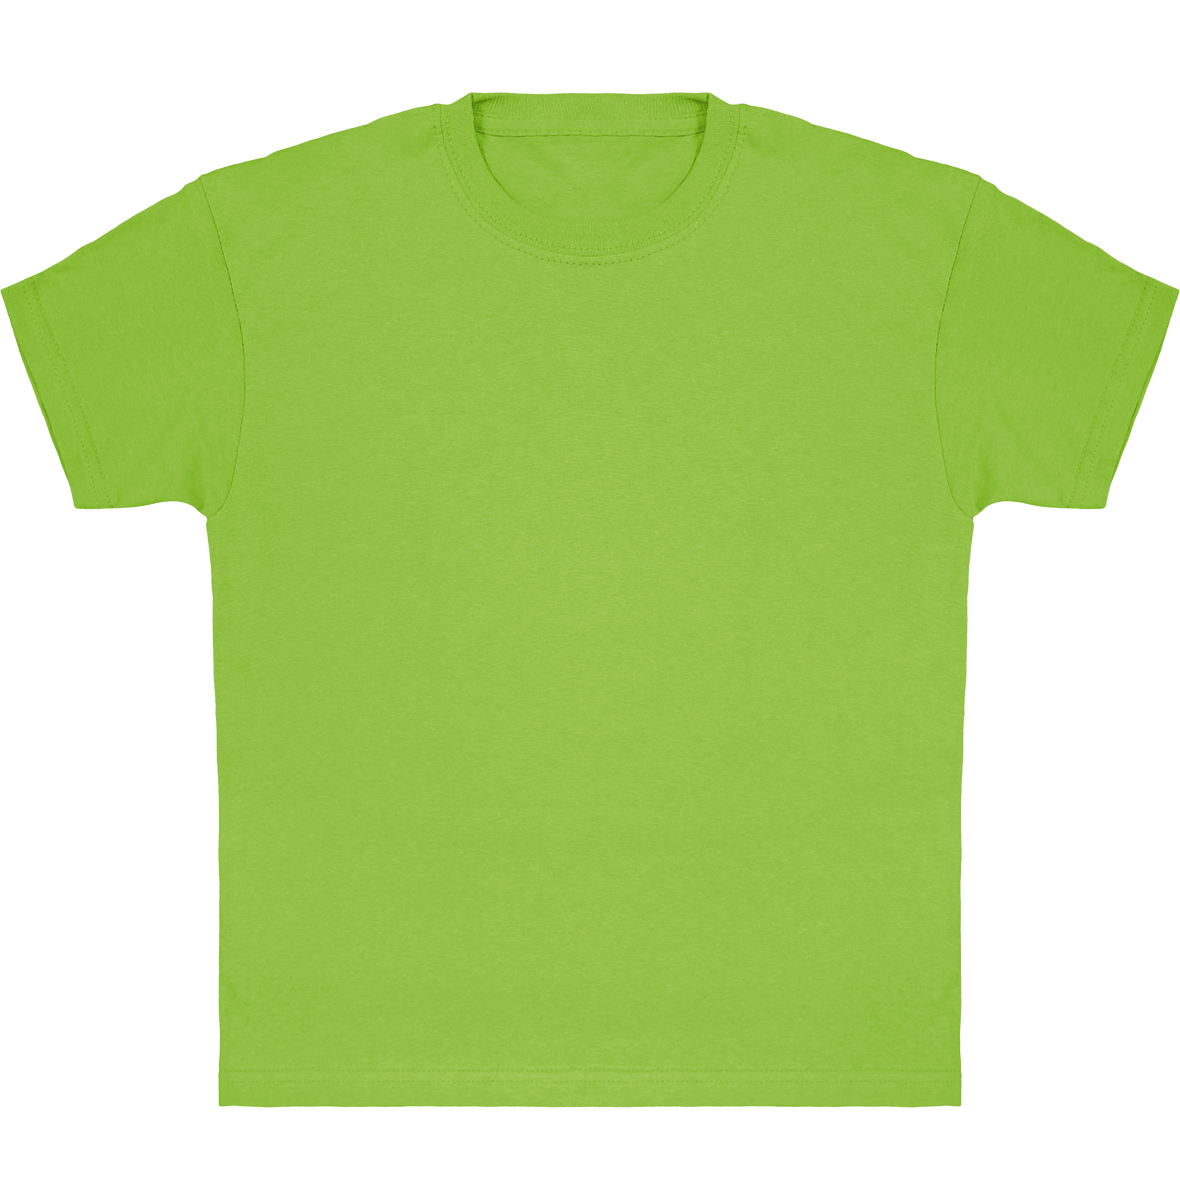 Classic Cotton T-Shirt For Children To Customize Lime